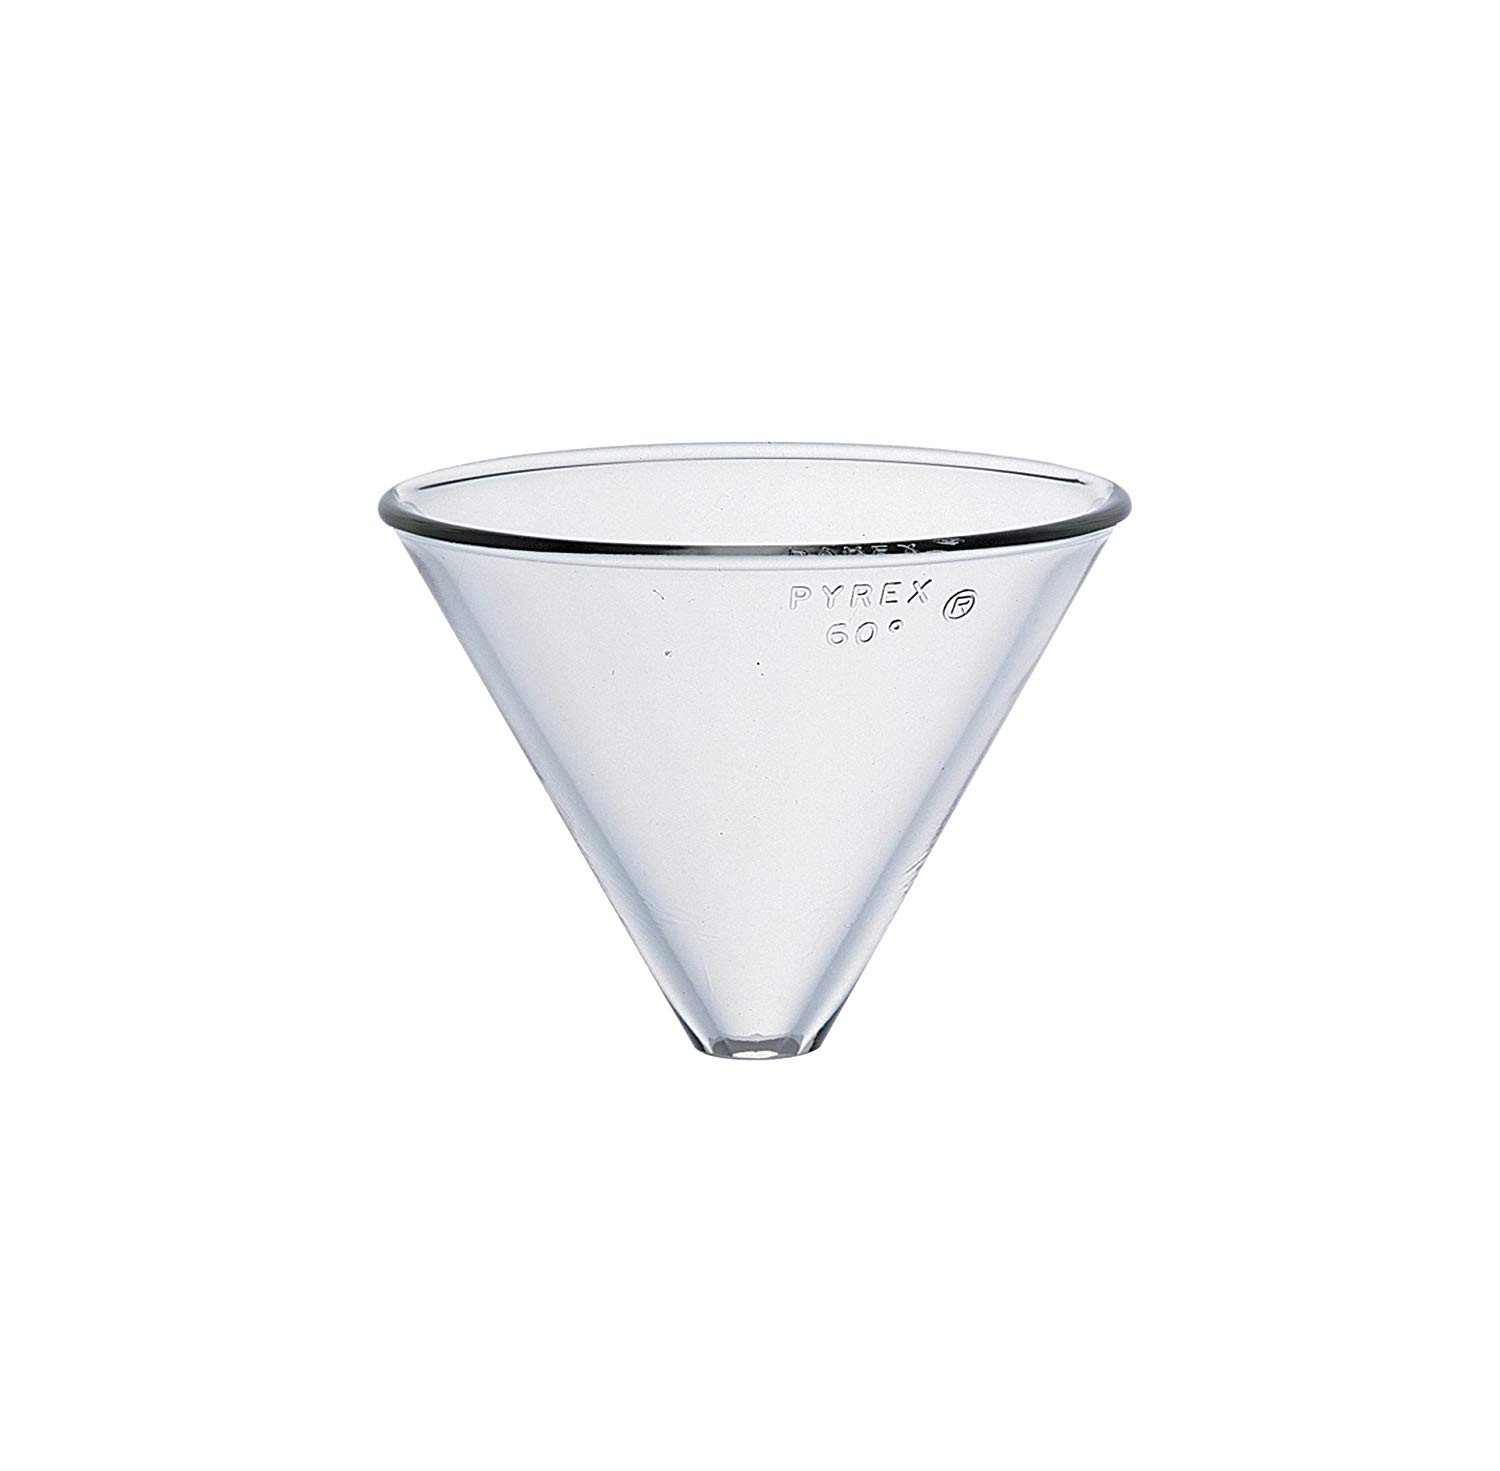 23 Lovely Tall Thick Glass Vase 2024 free download tall thick glass vase of corning pyrex borosilicate glass plain stemless funnel 100mm top in corning pyrex borosilicate glass plain stemless funnel 100mm top i d science lab funnels amazon c